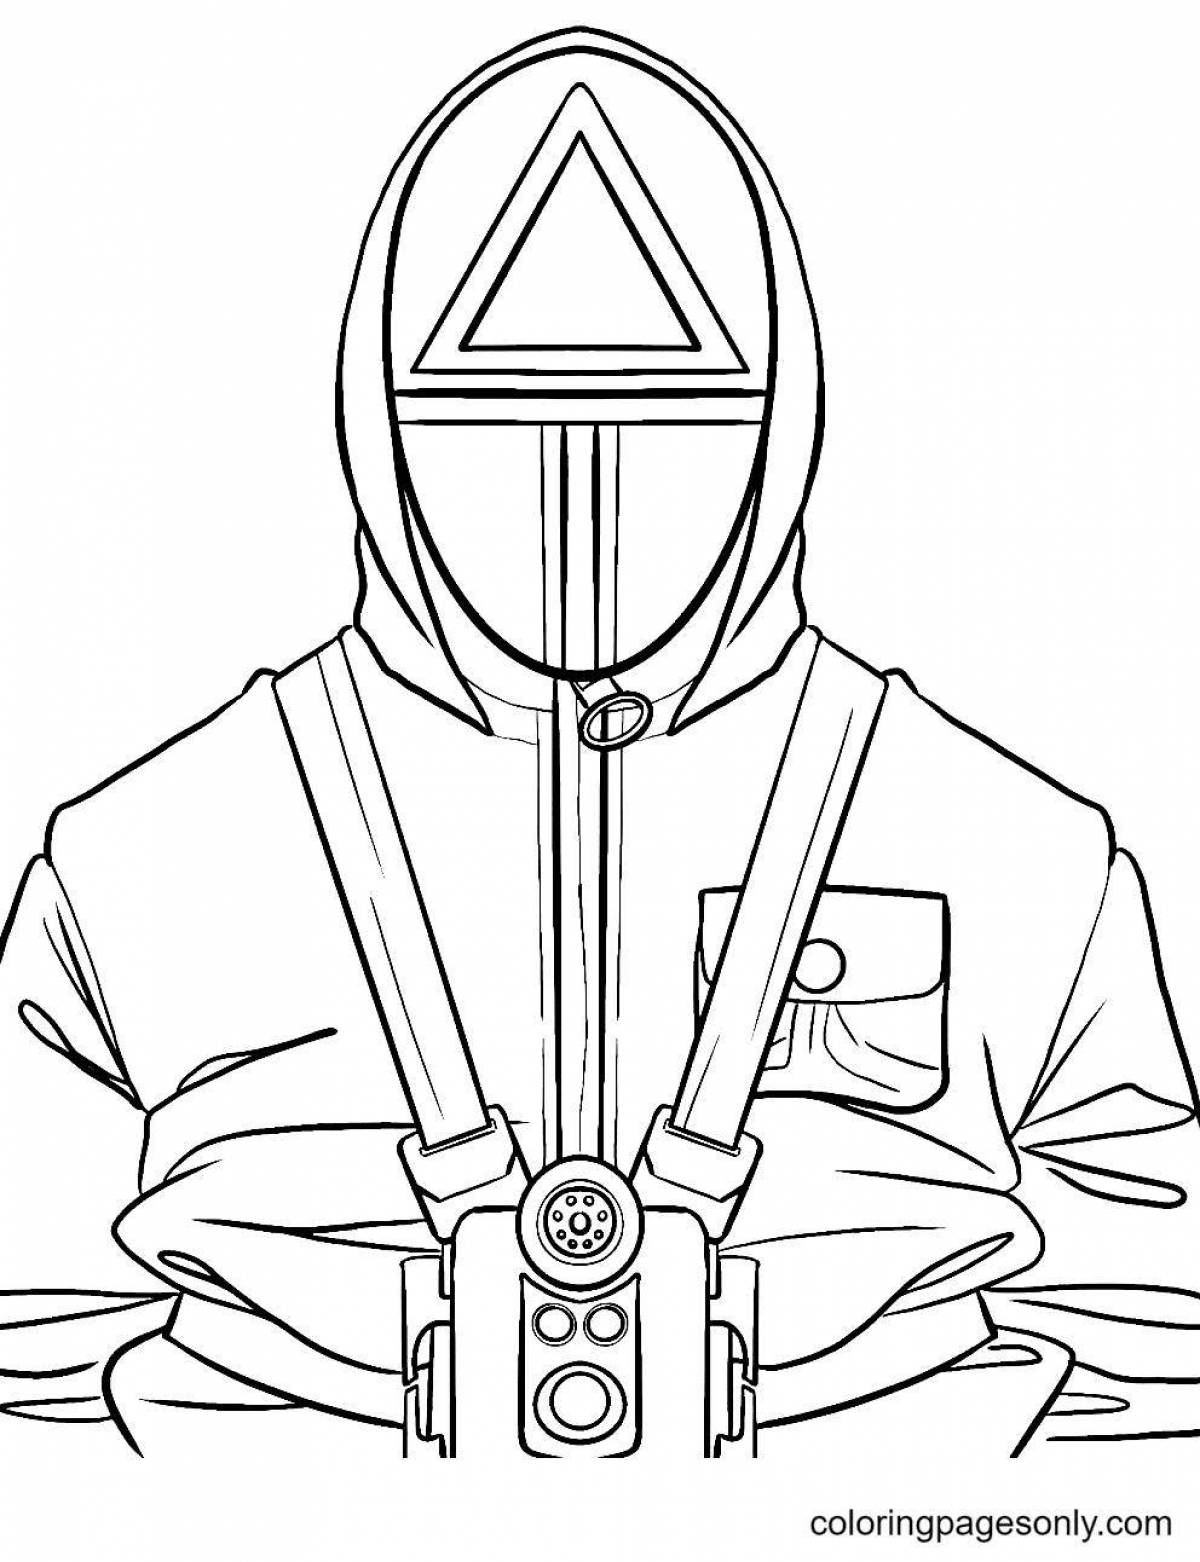 Coloring page attractive security guard